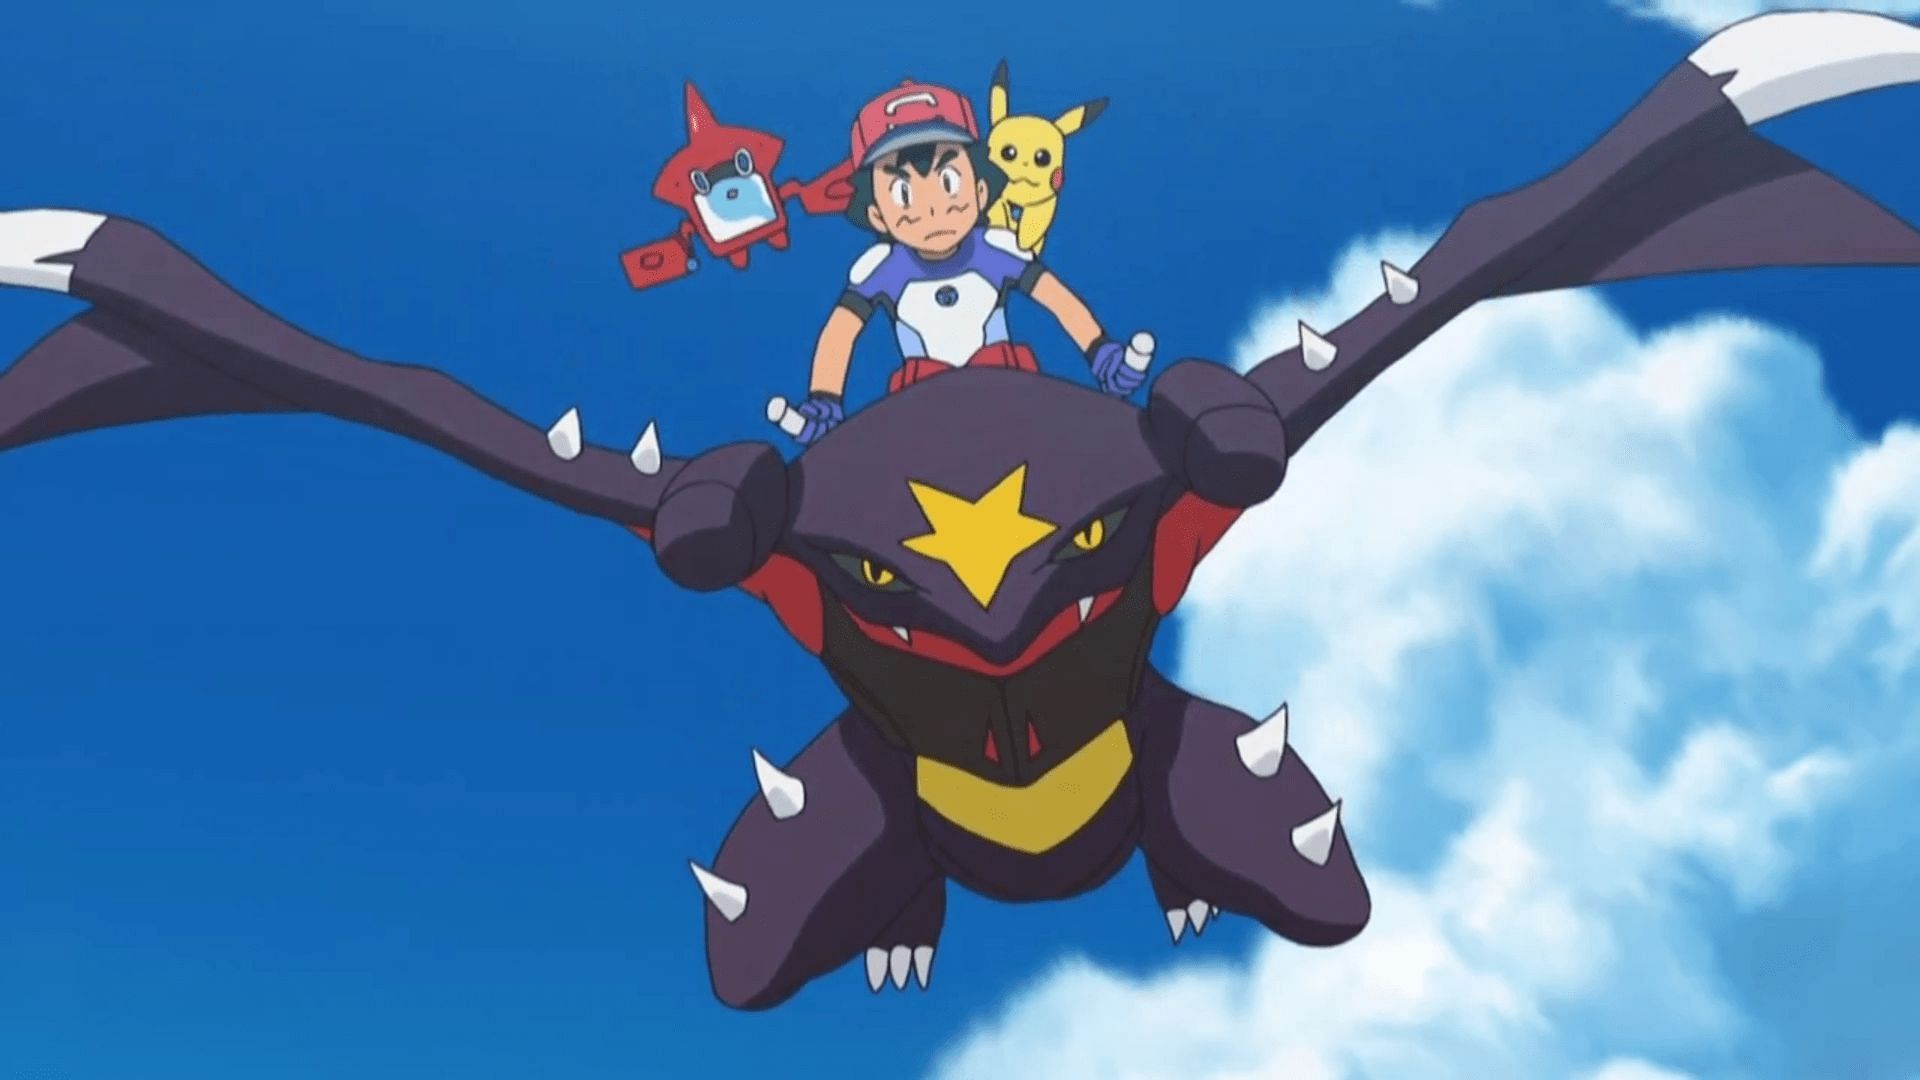 Garchomp as it appears in the anime (Image via The Pokemon Company)